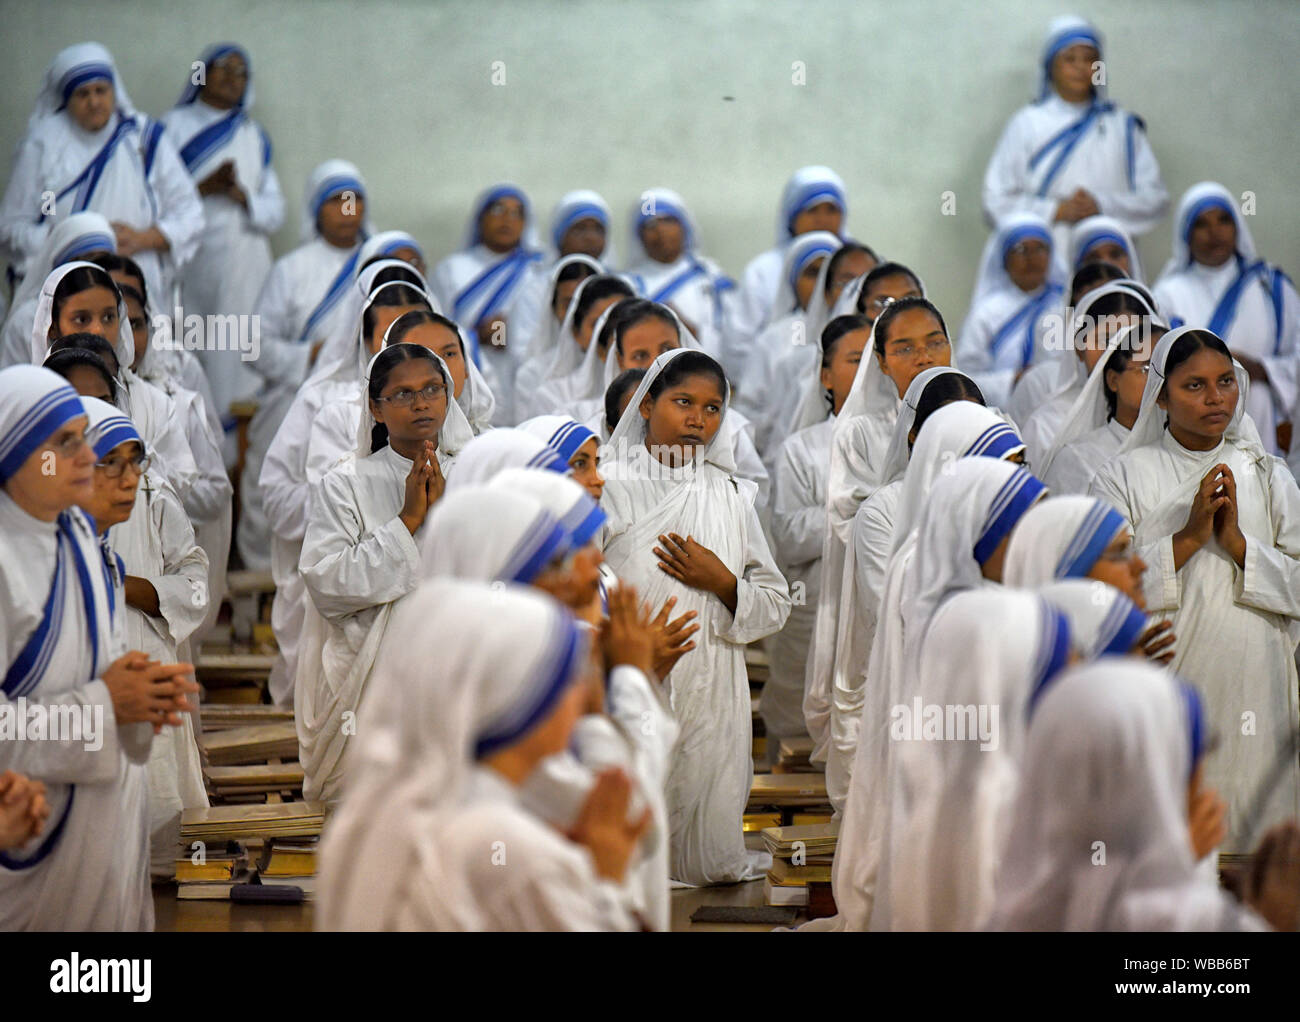 Kolkata, India. 26th Aug, 2019. Christian Nuns offer their love and prayers on the eve of Mother Teresa's 110th birthday at Missionaries of Charity in Kolkata.Mother Teresa, known in the Catholic Church as Saint Teresa of Calcutta, devoted her life to caring for the sick and poor lives throughout the world & canonised by the Roman Catholic Church as Saint Teresa. Credit: SOPA Images Limited/Alamy Live News Stock Photo